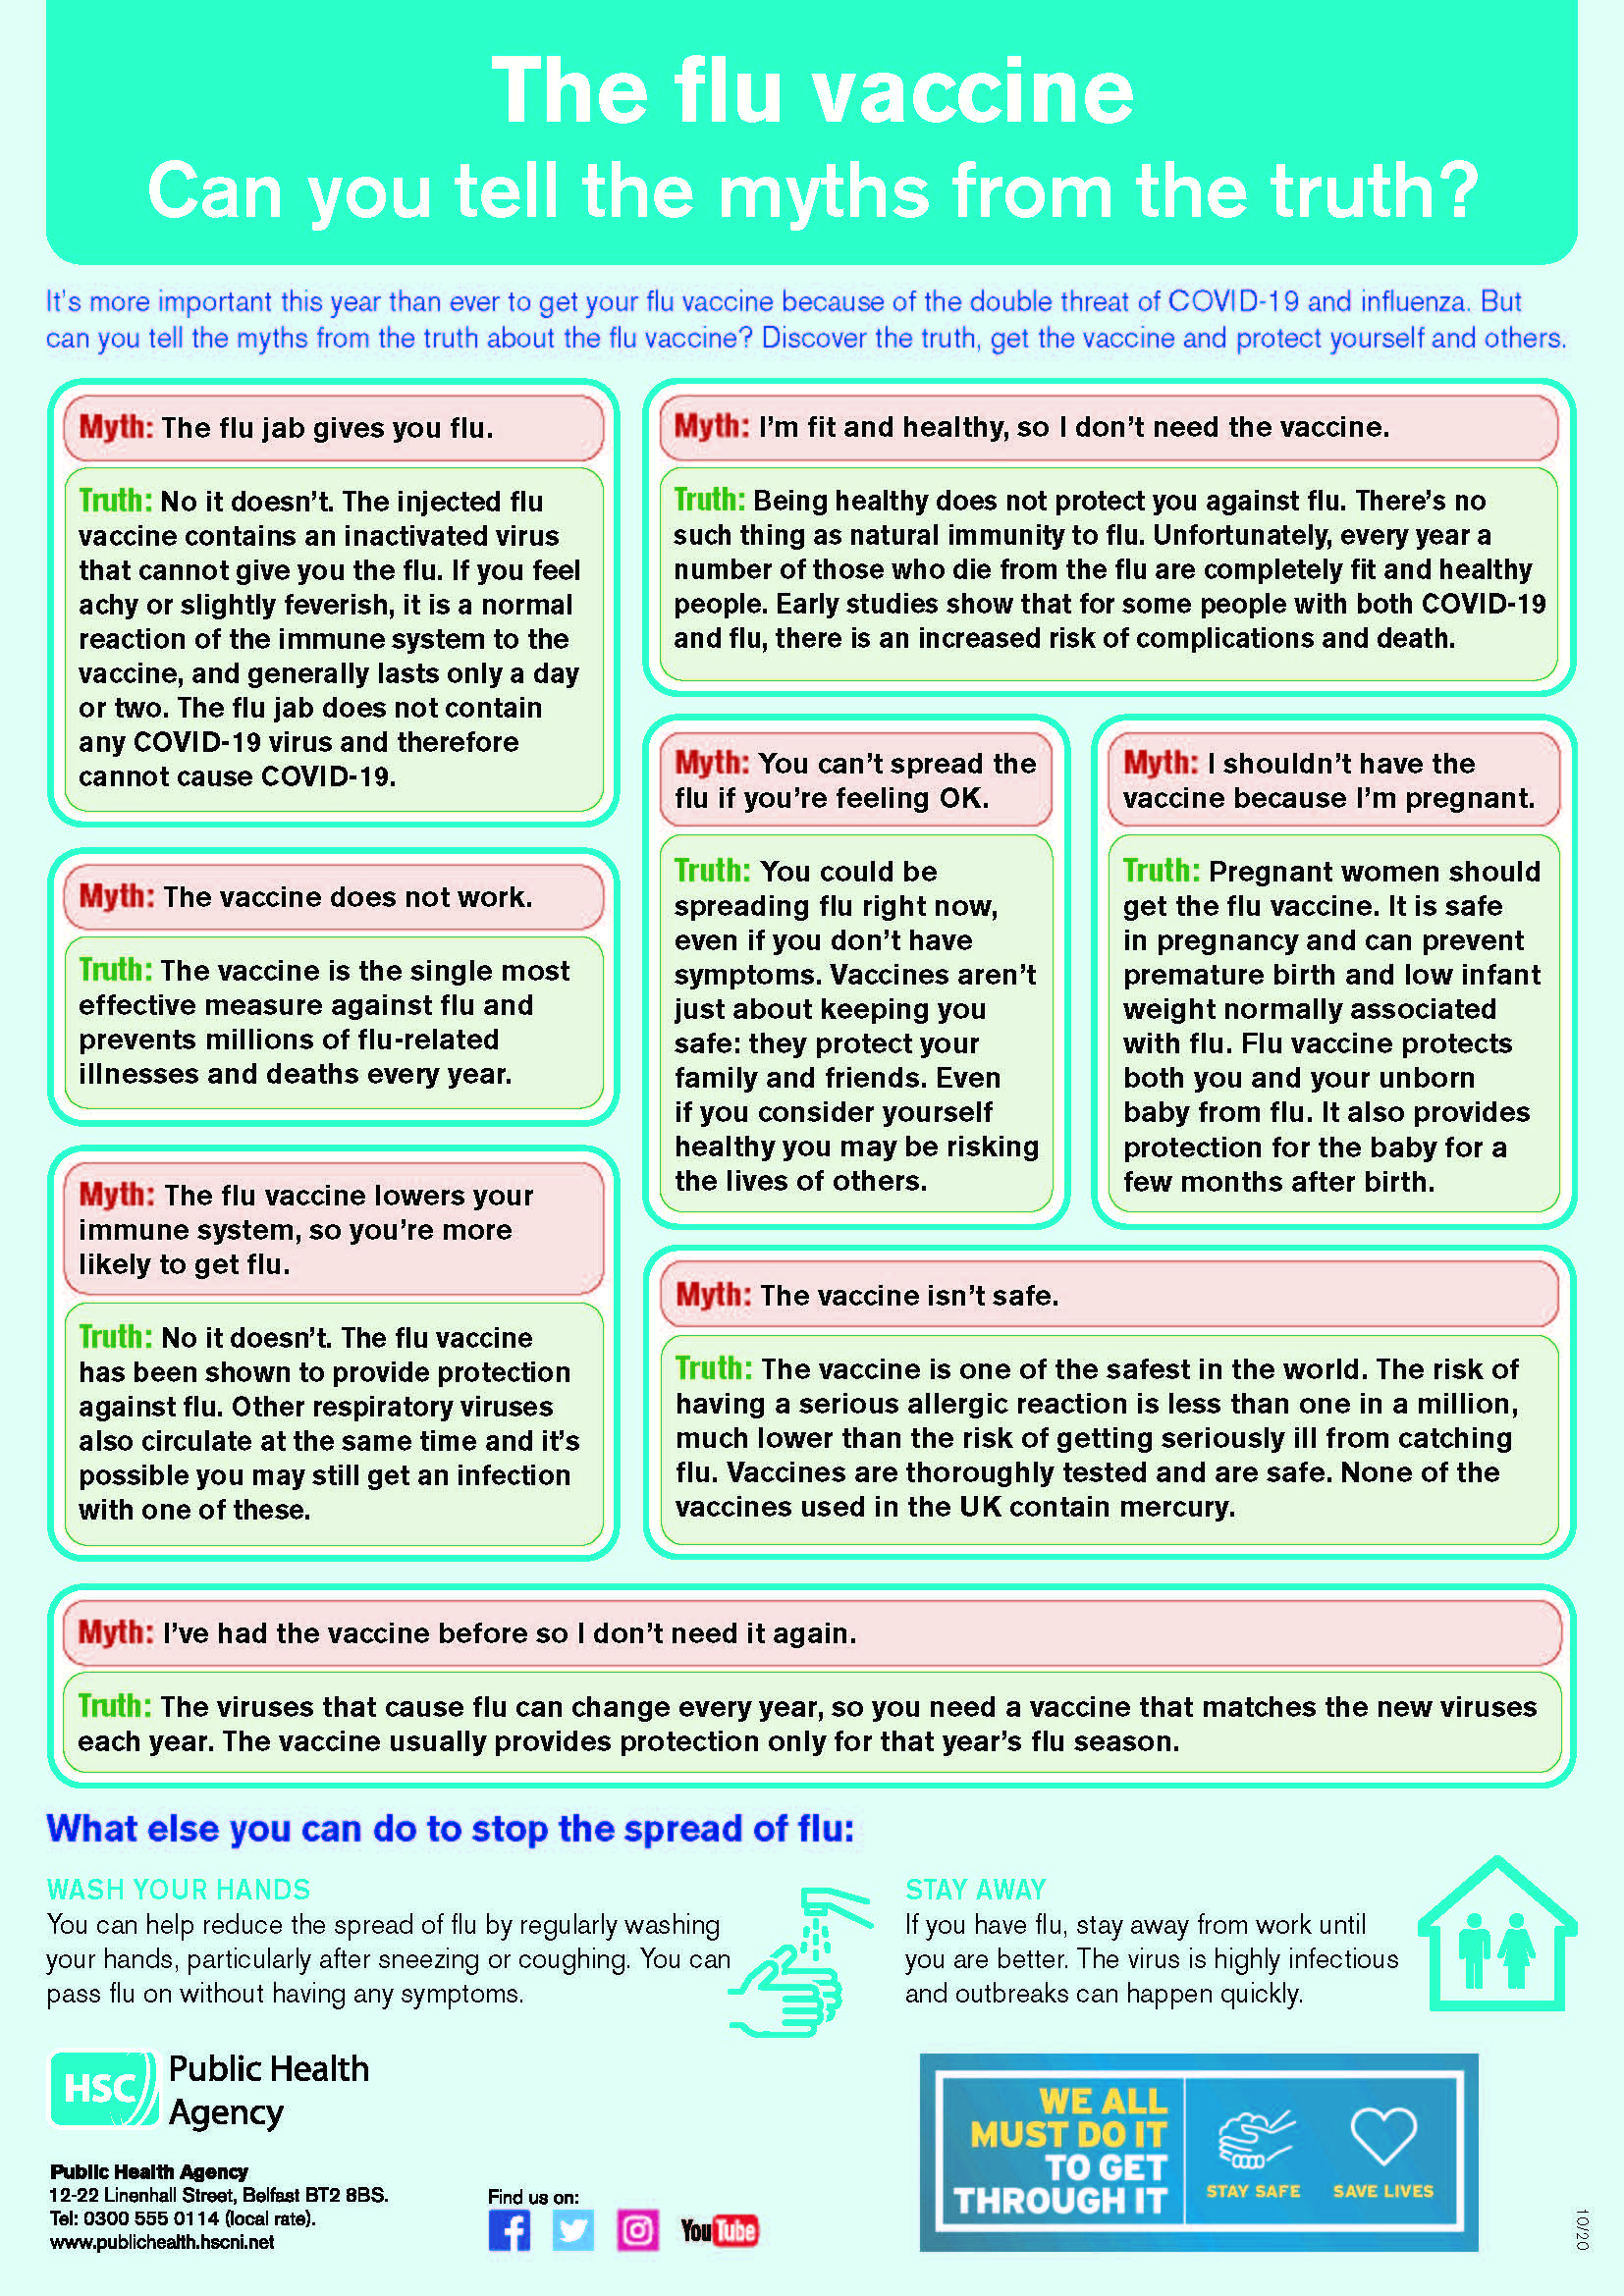 Flu myths and truth flyer image